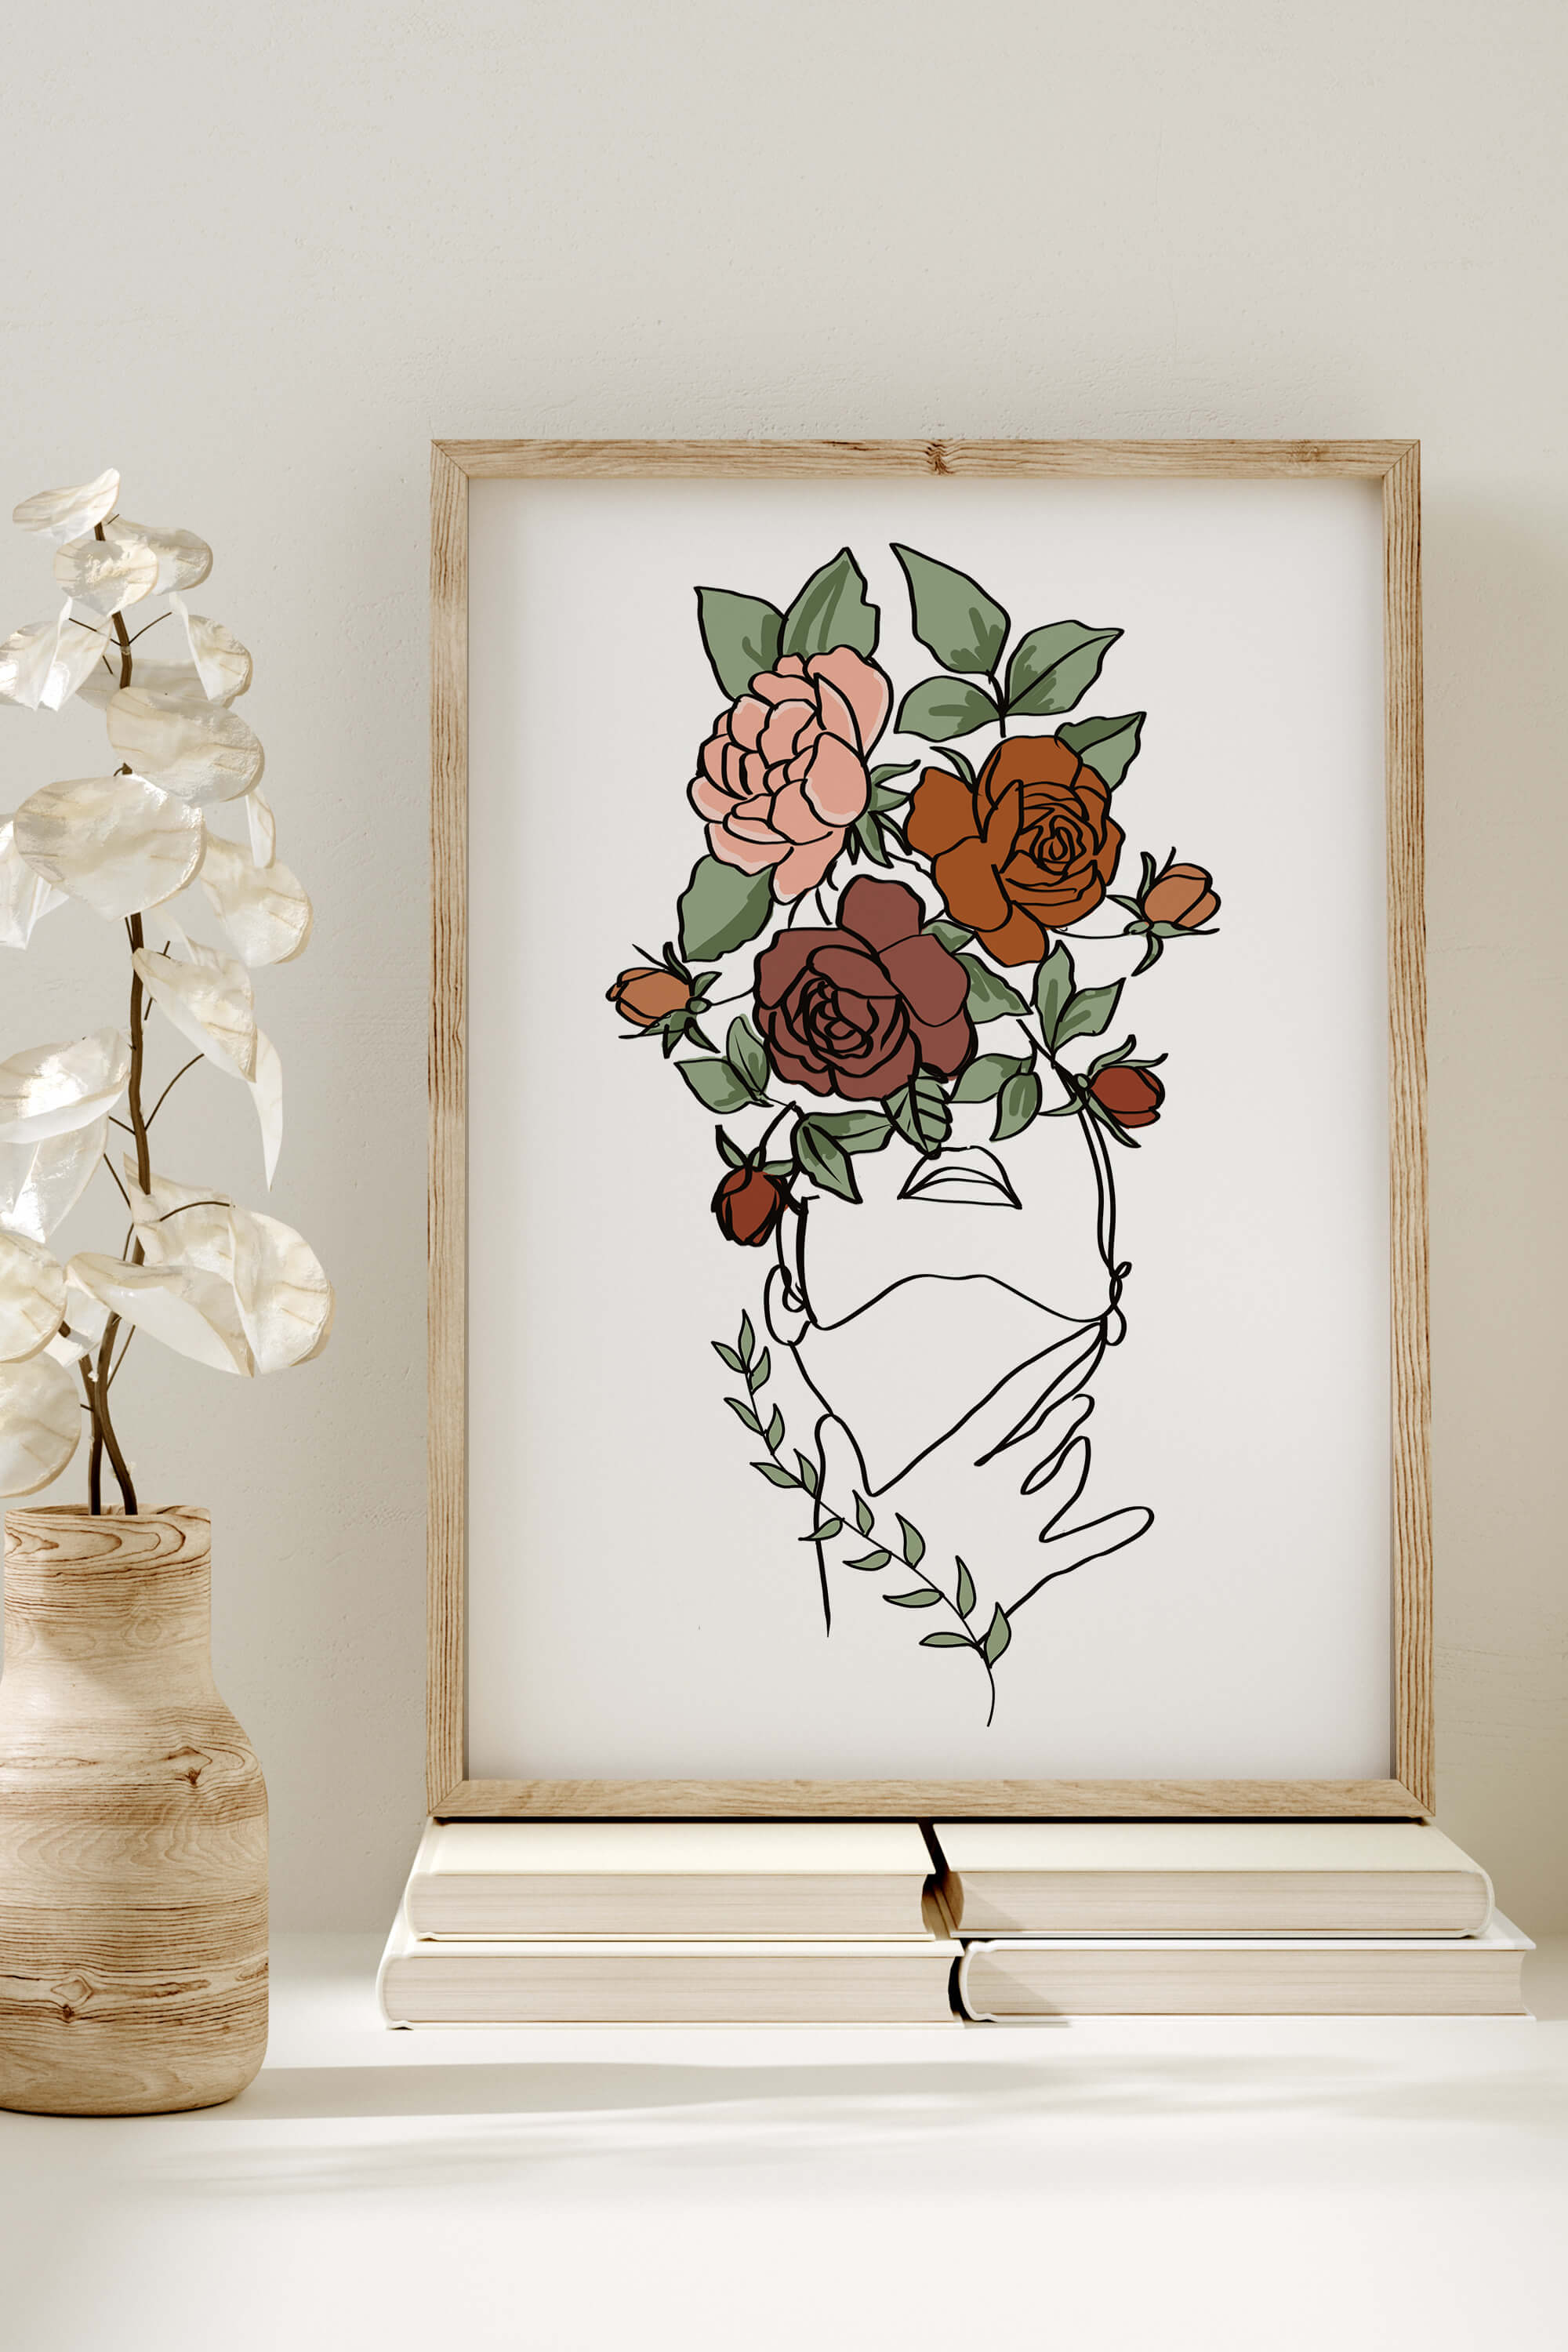 Minimalist beauty in a floral artwork with clean lines and floral patterns, perfect for various decor styles.